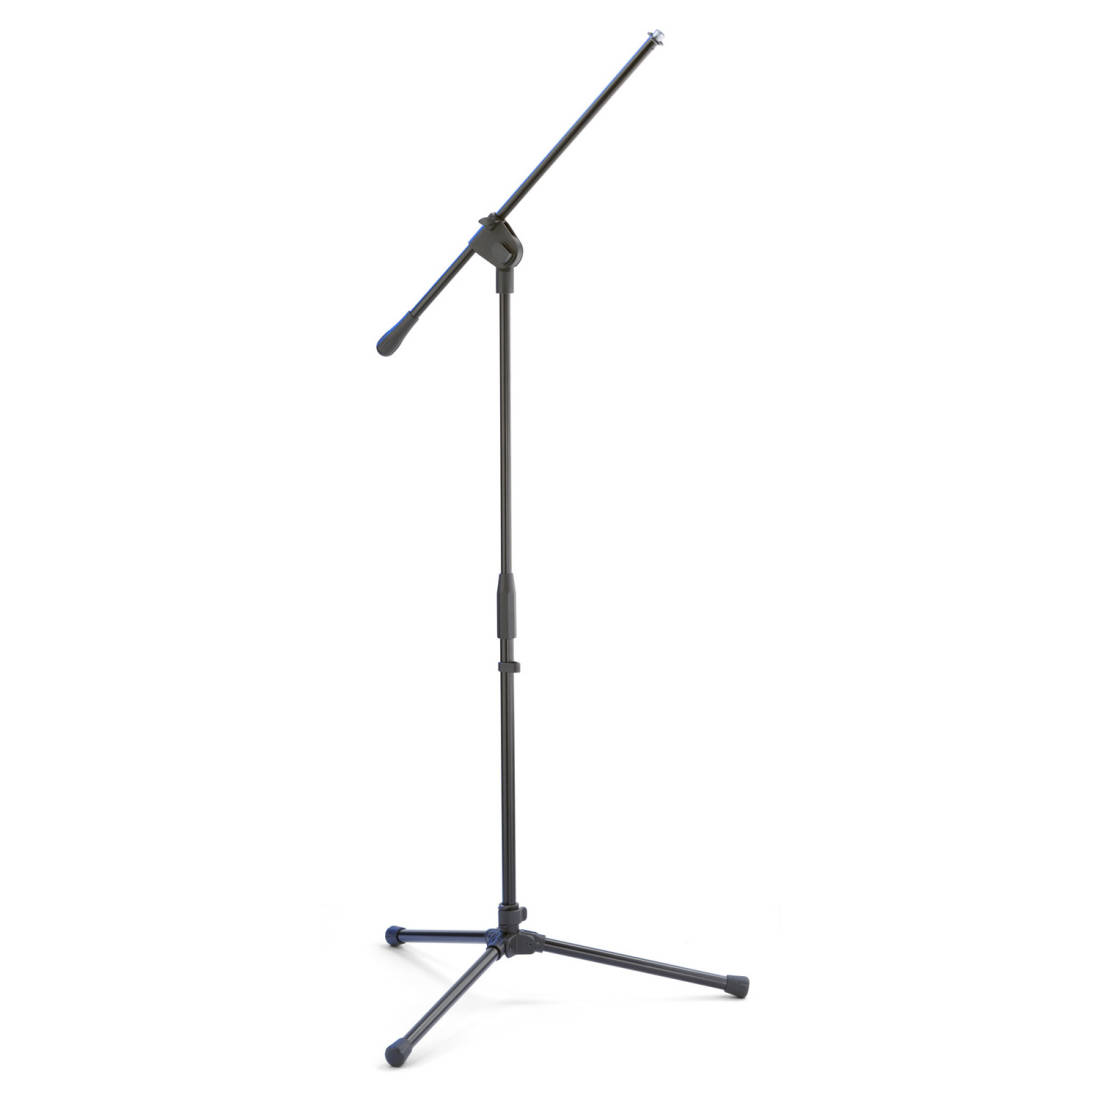 MK10 Professional Microphone Stand